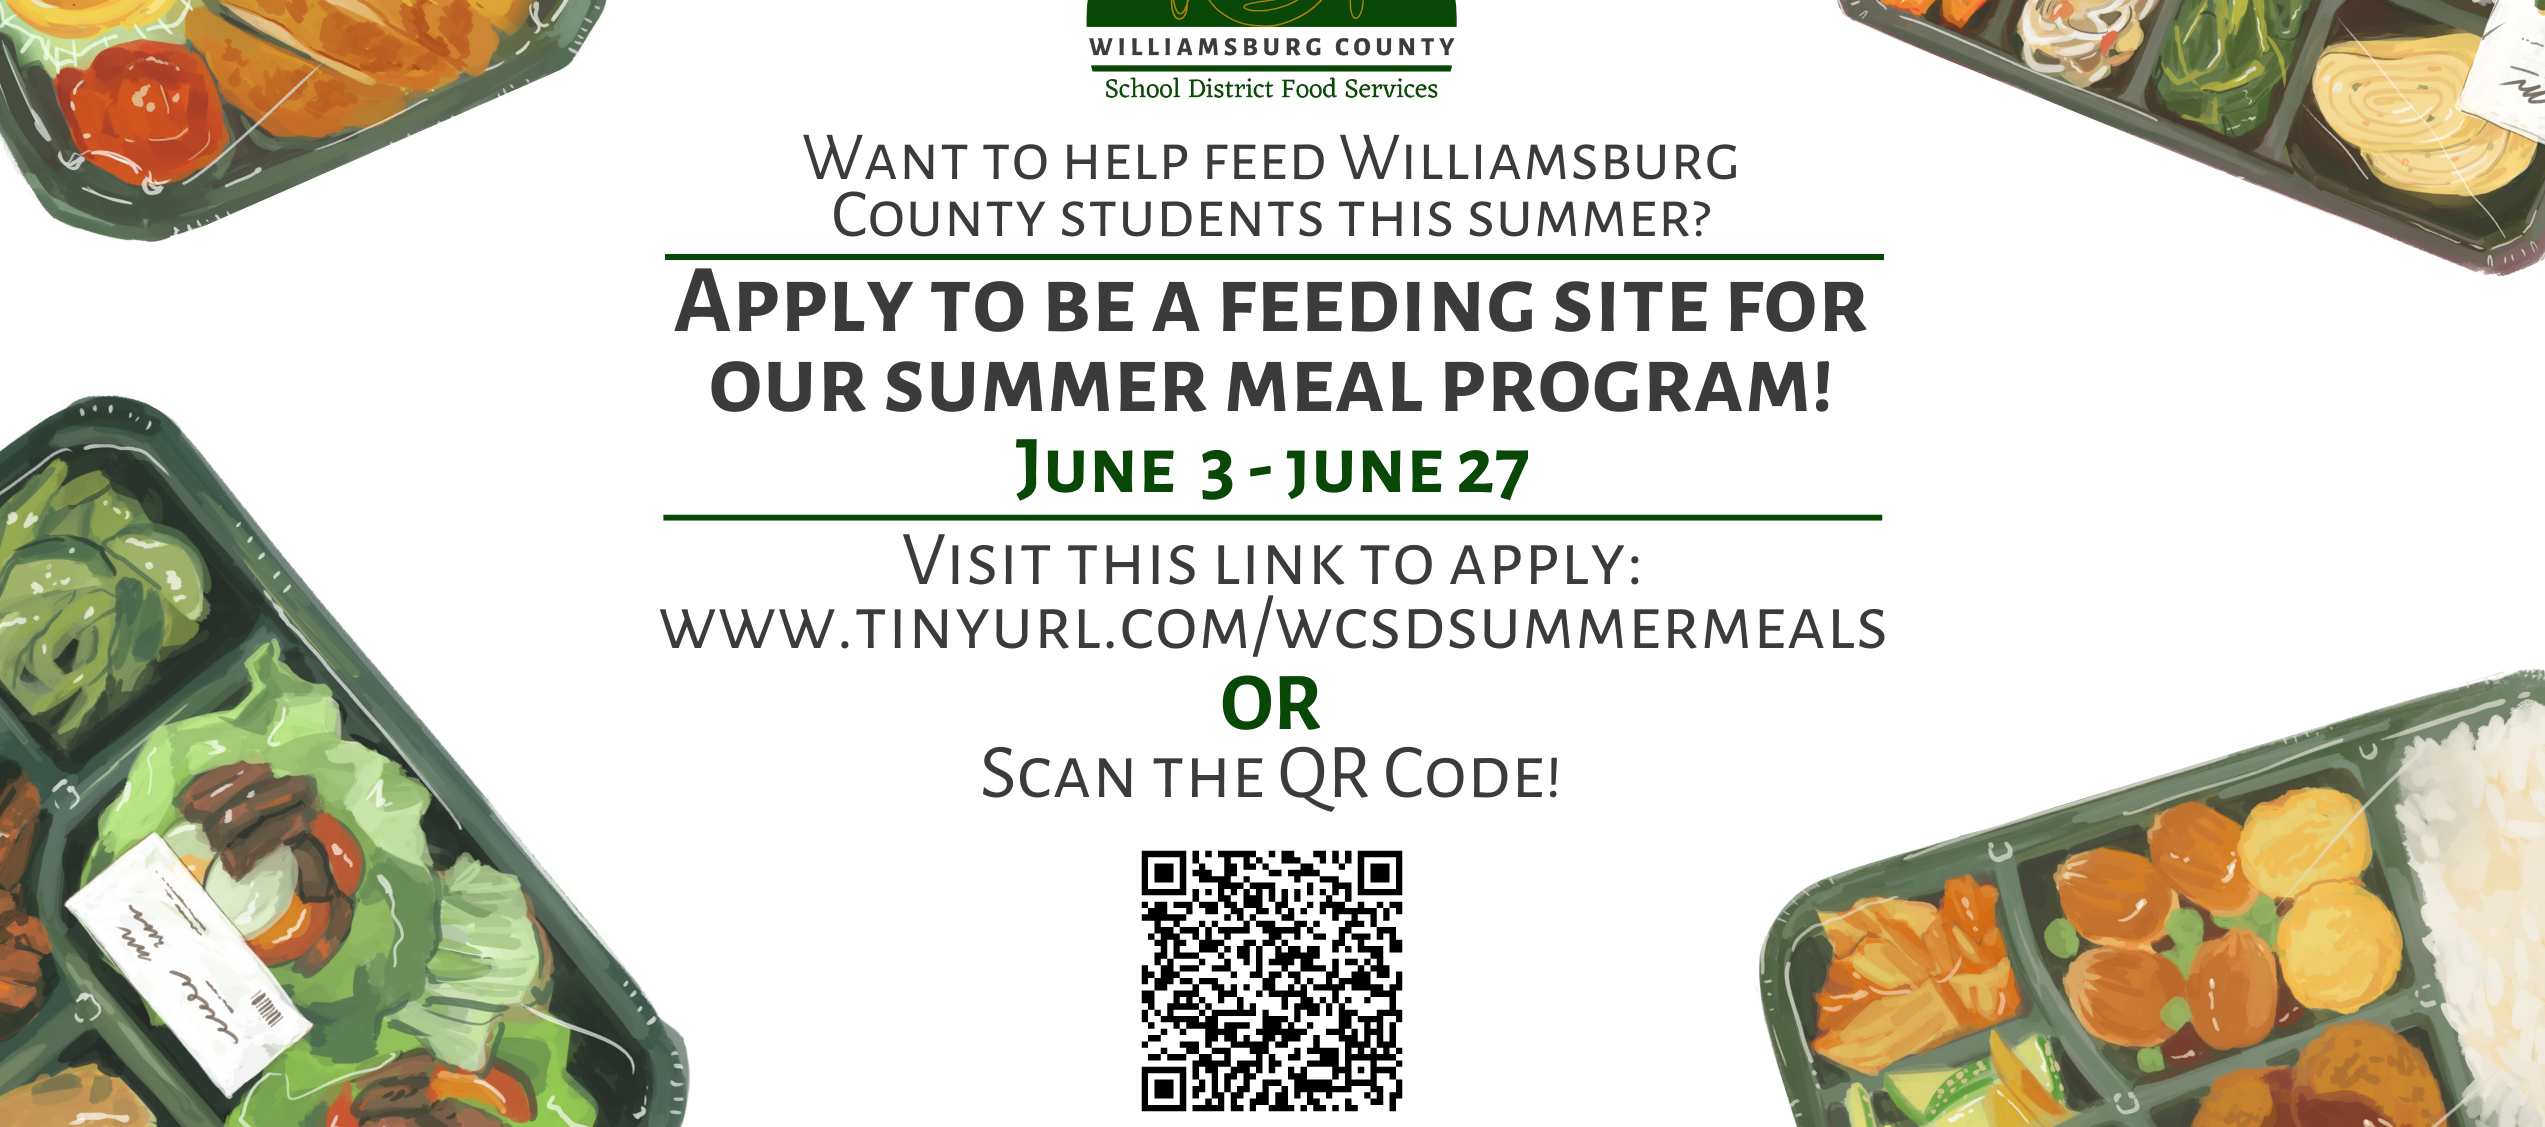 Flyer-Williamsburg County School District Food Services. Want to help feed Williamsburg County Students this summer? Apply to be a feeding site for our summer meal program! June 3-June 27. Visit this link to apply: www.tinyurl.com/wcsdsummermeals or scan the QR code! (picture of QR code)